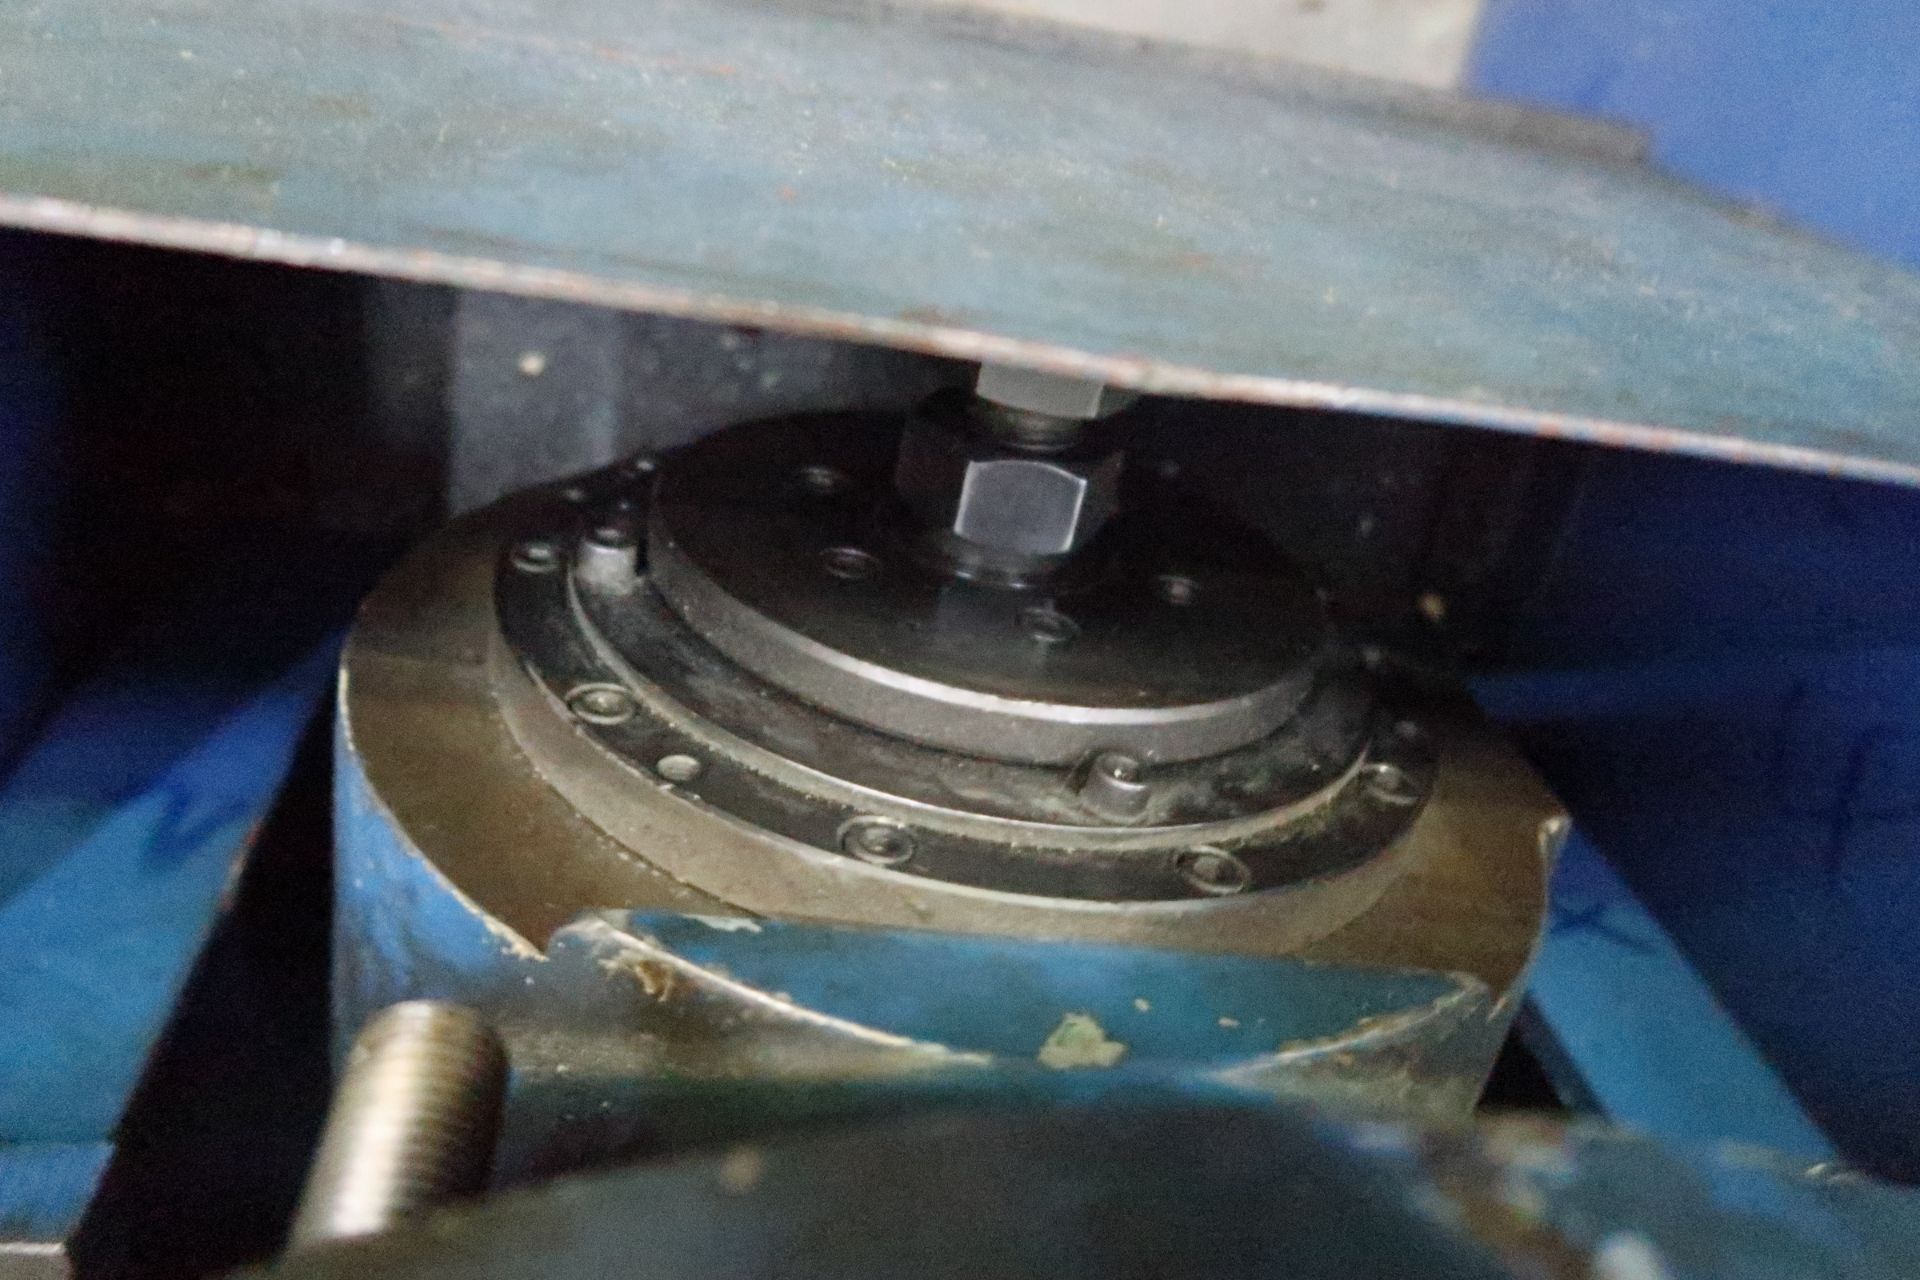 90 Degree Angle Head For Awea Vertical Machining (SOLD AS-IS - NO WARRANTY) - Image 6 of 6